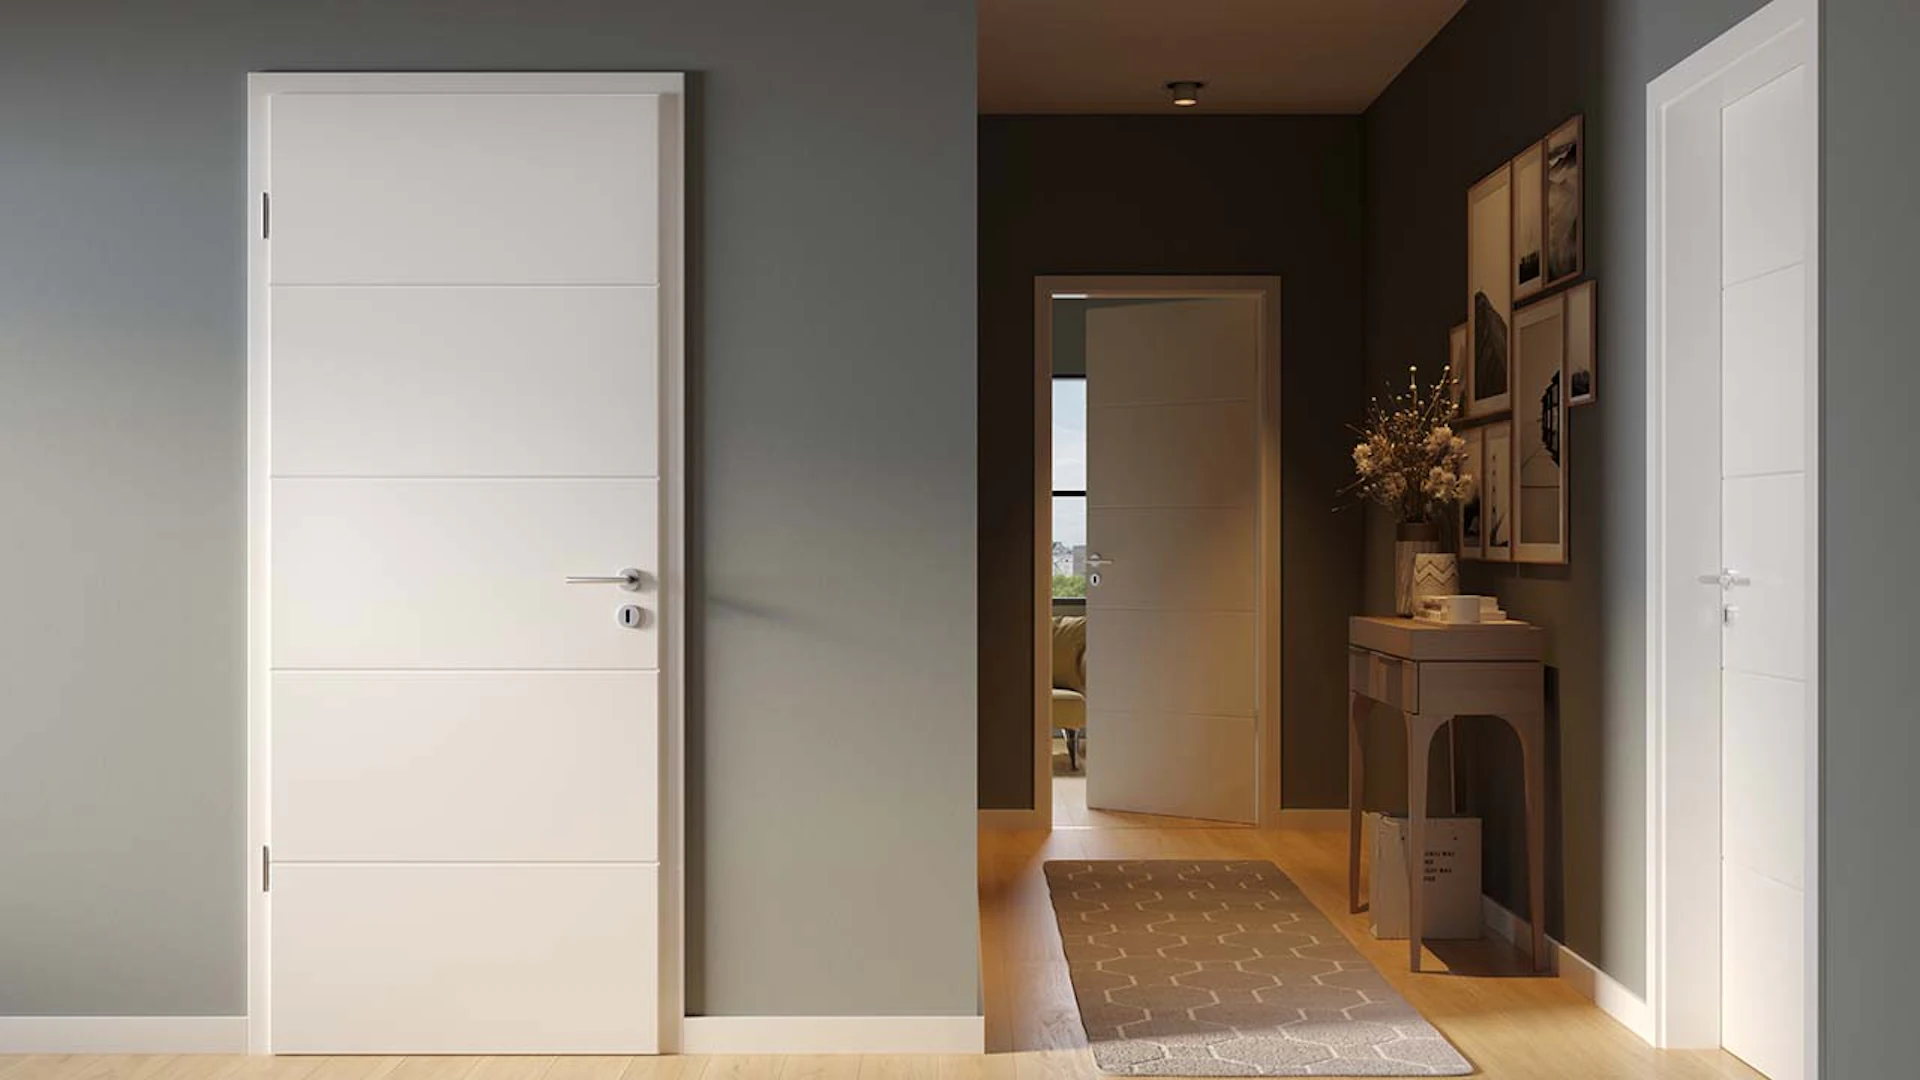 planeo interior door lacquer 2.0 - Kinga 9016 white lacquer 2110 x 610 mm DIN R - round RSP hinge 3-t